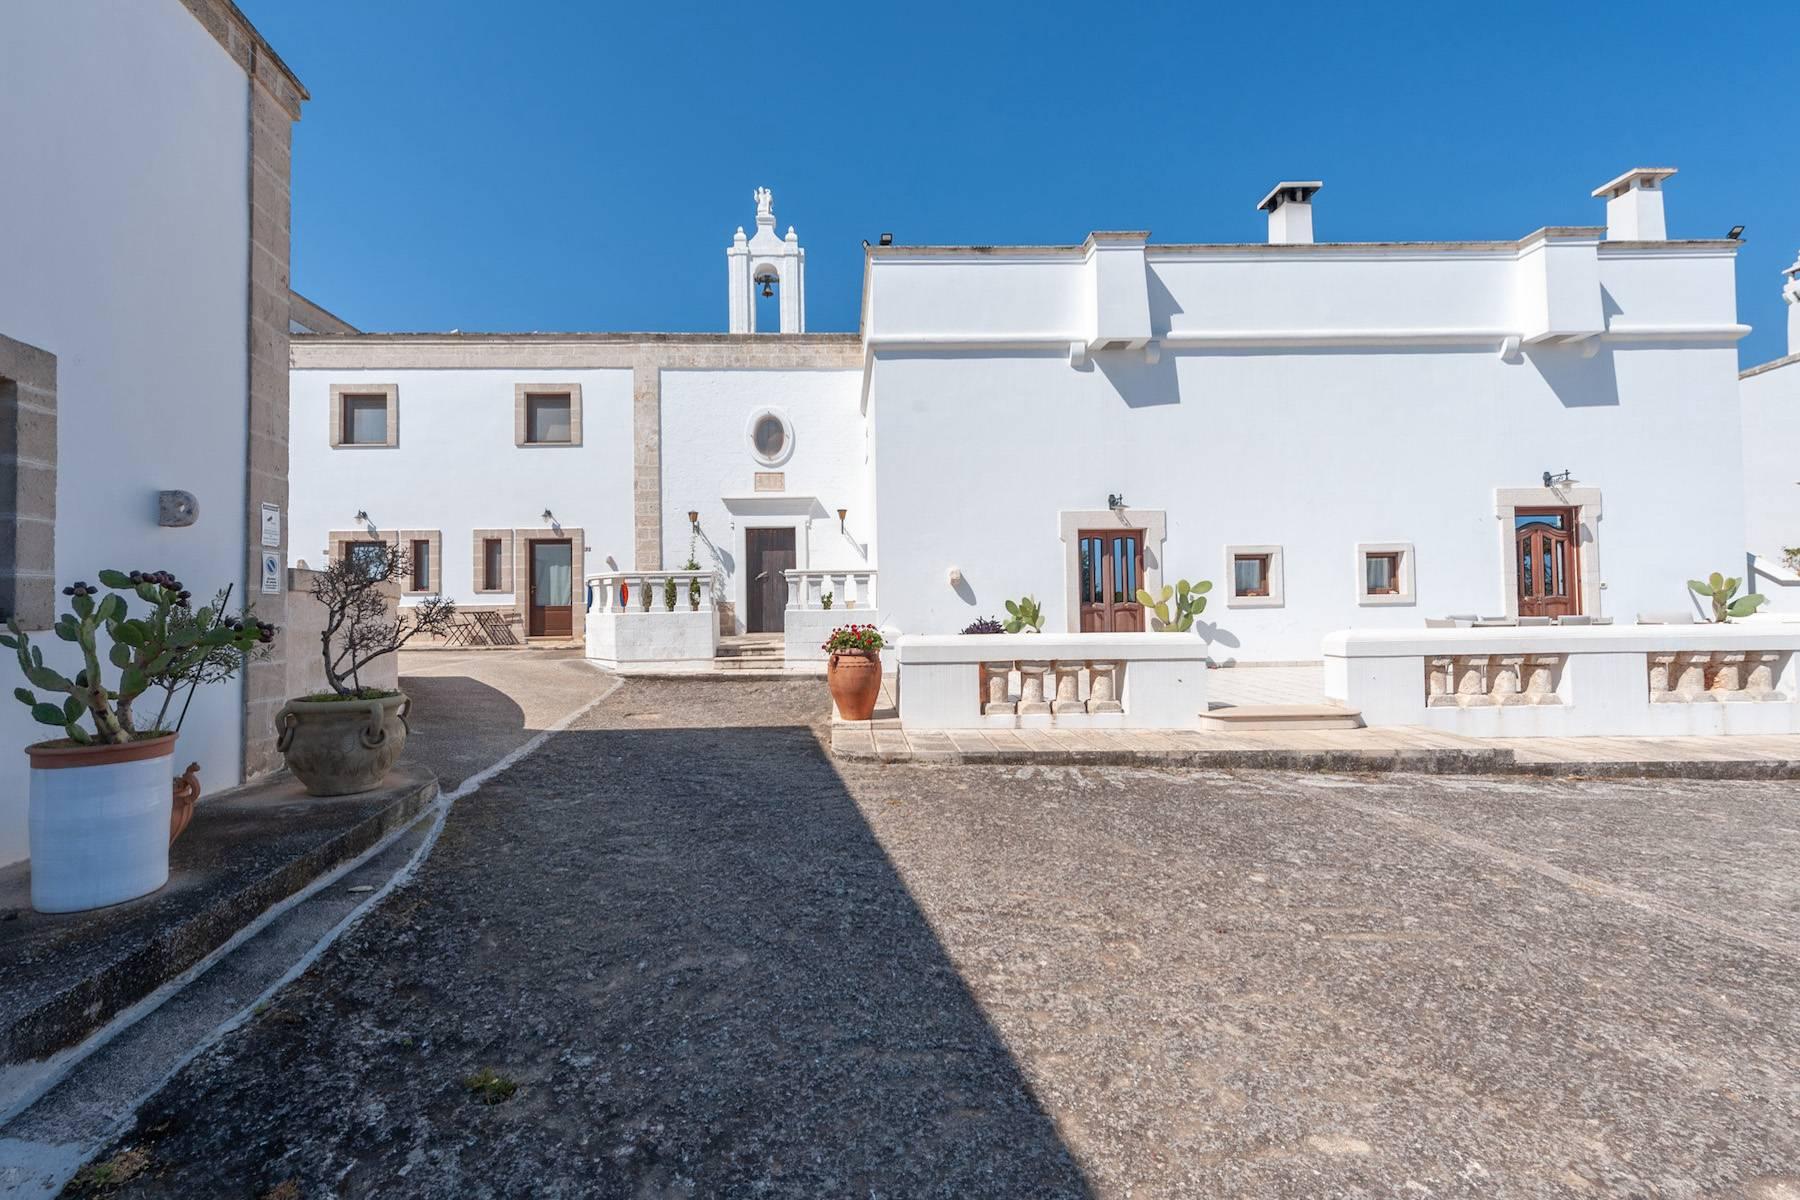 Charming 18th century Masseria surrounded by centuries-old olive trees - 1